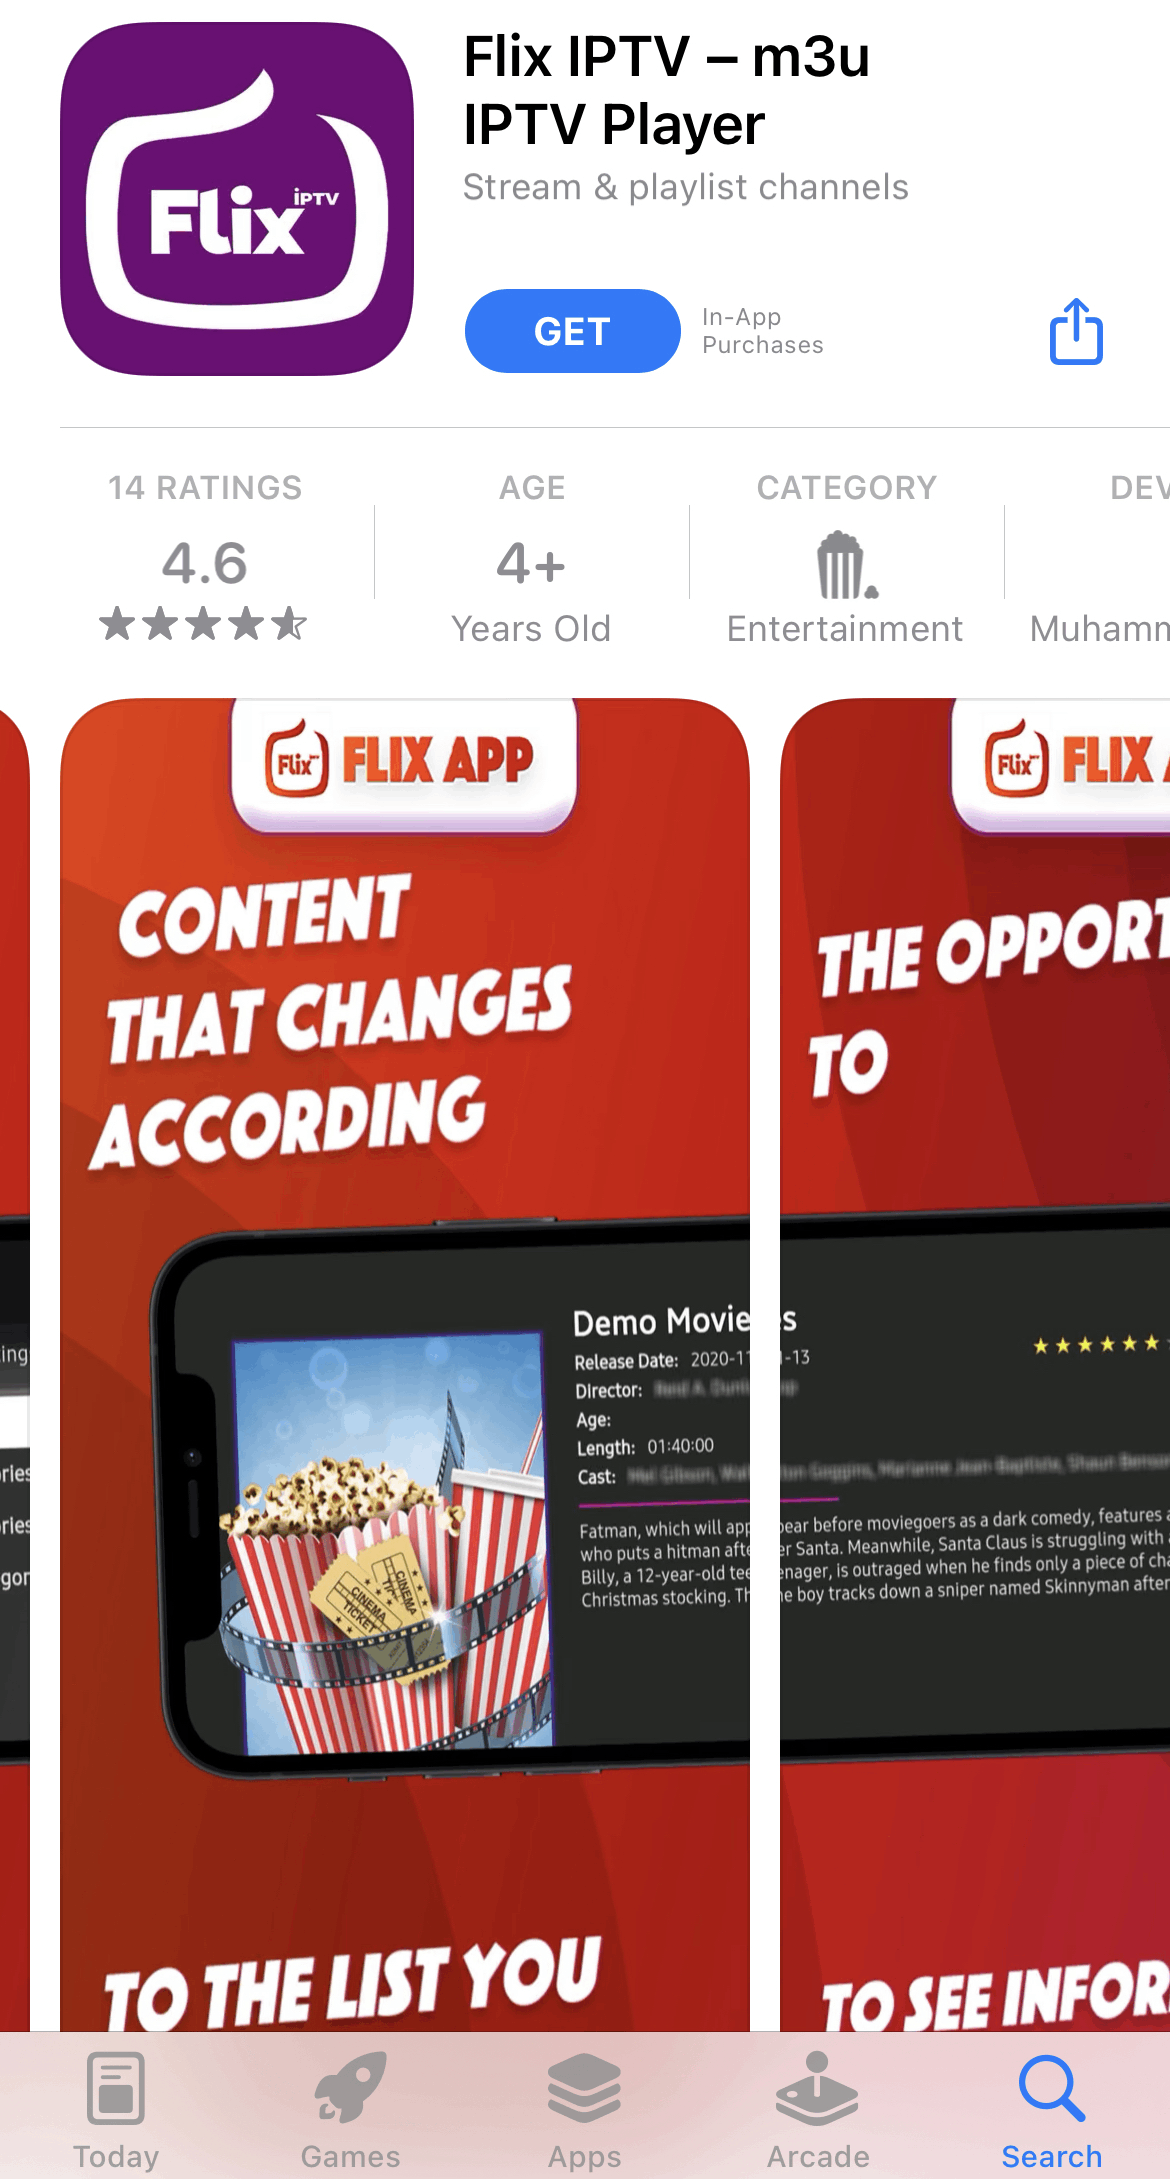 Select Get to install Flix IPTV